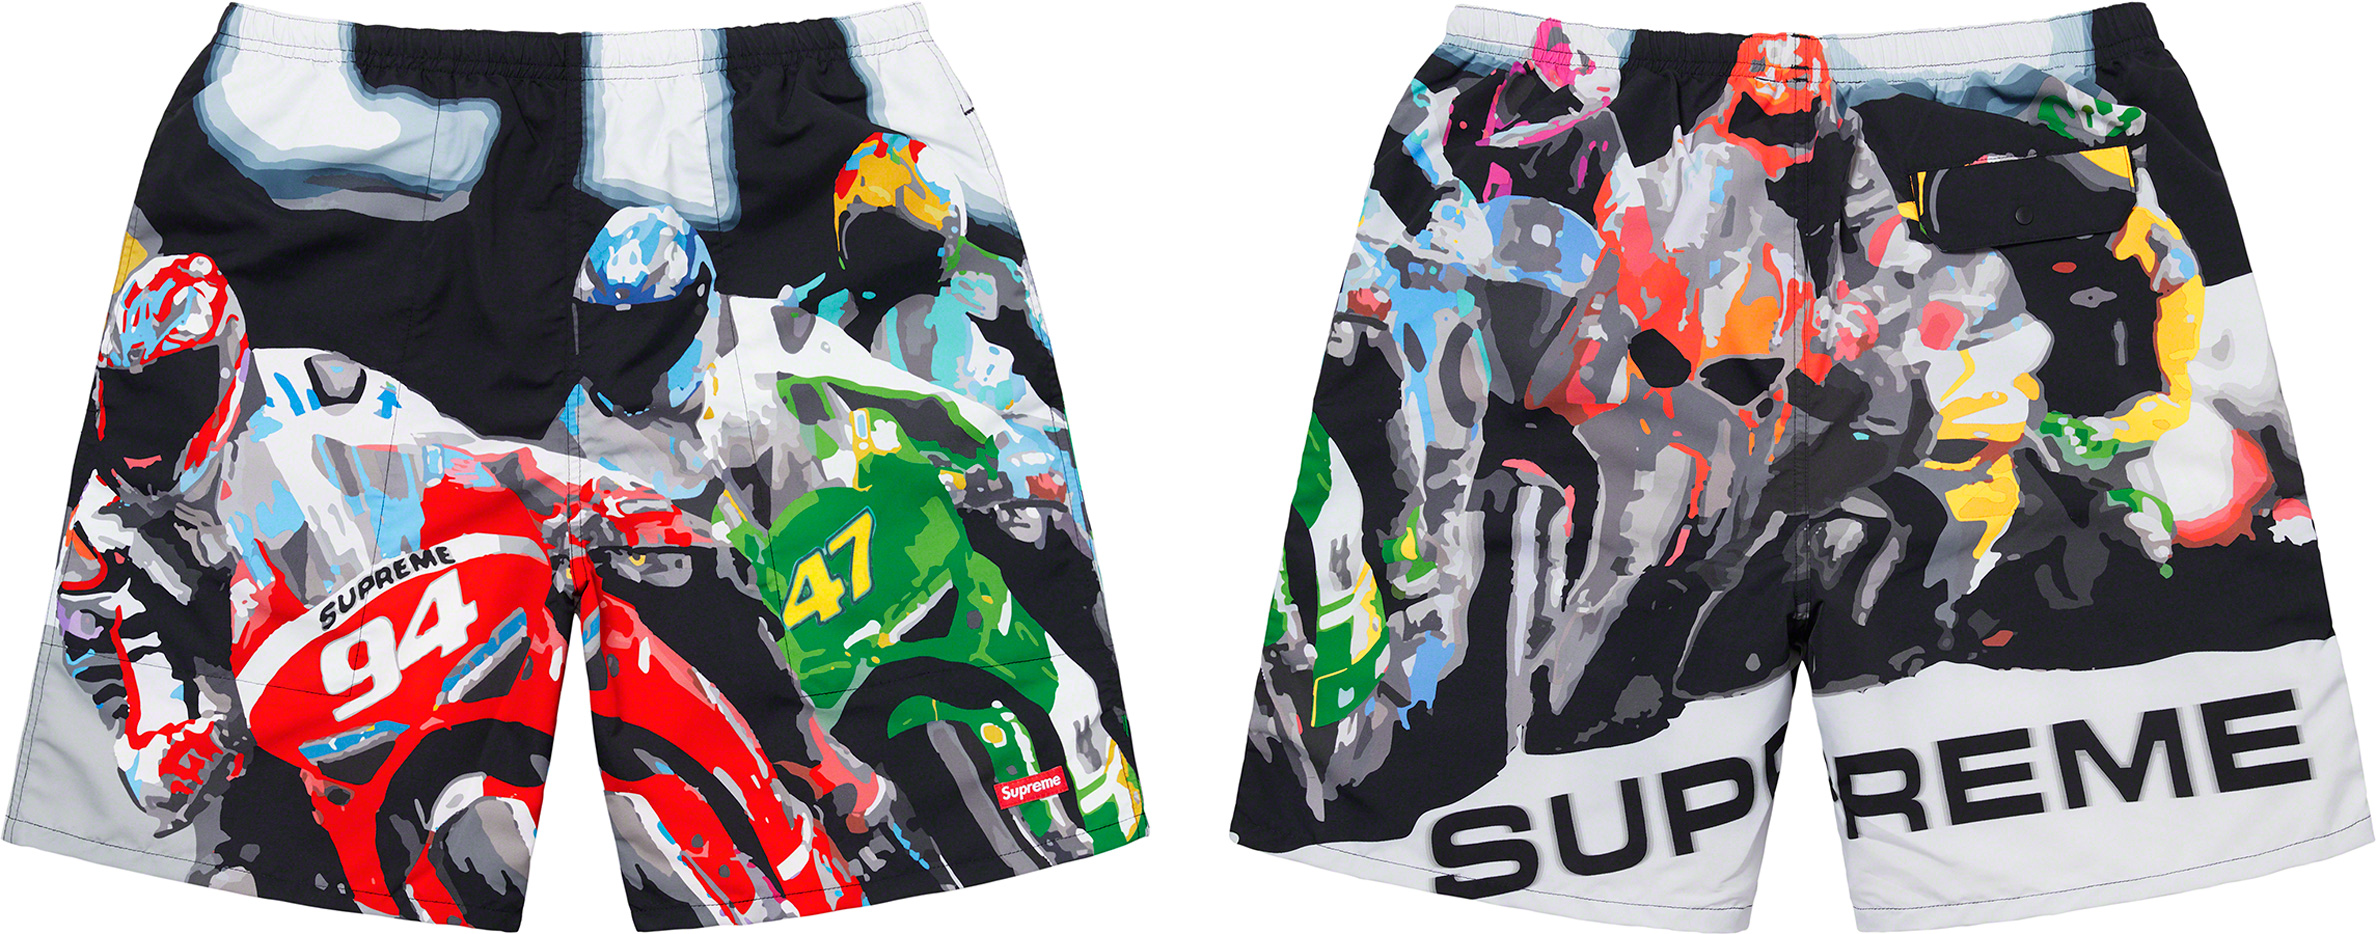 Supreme Water Shorts Online, 52% OFF | www.hcb.cat